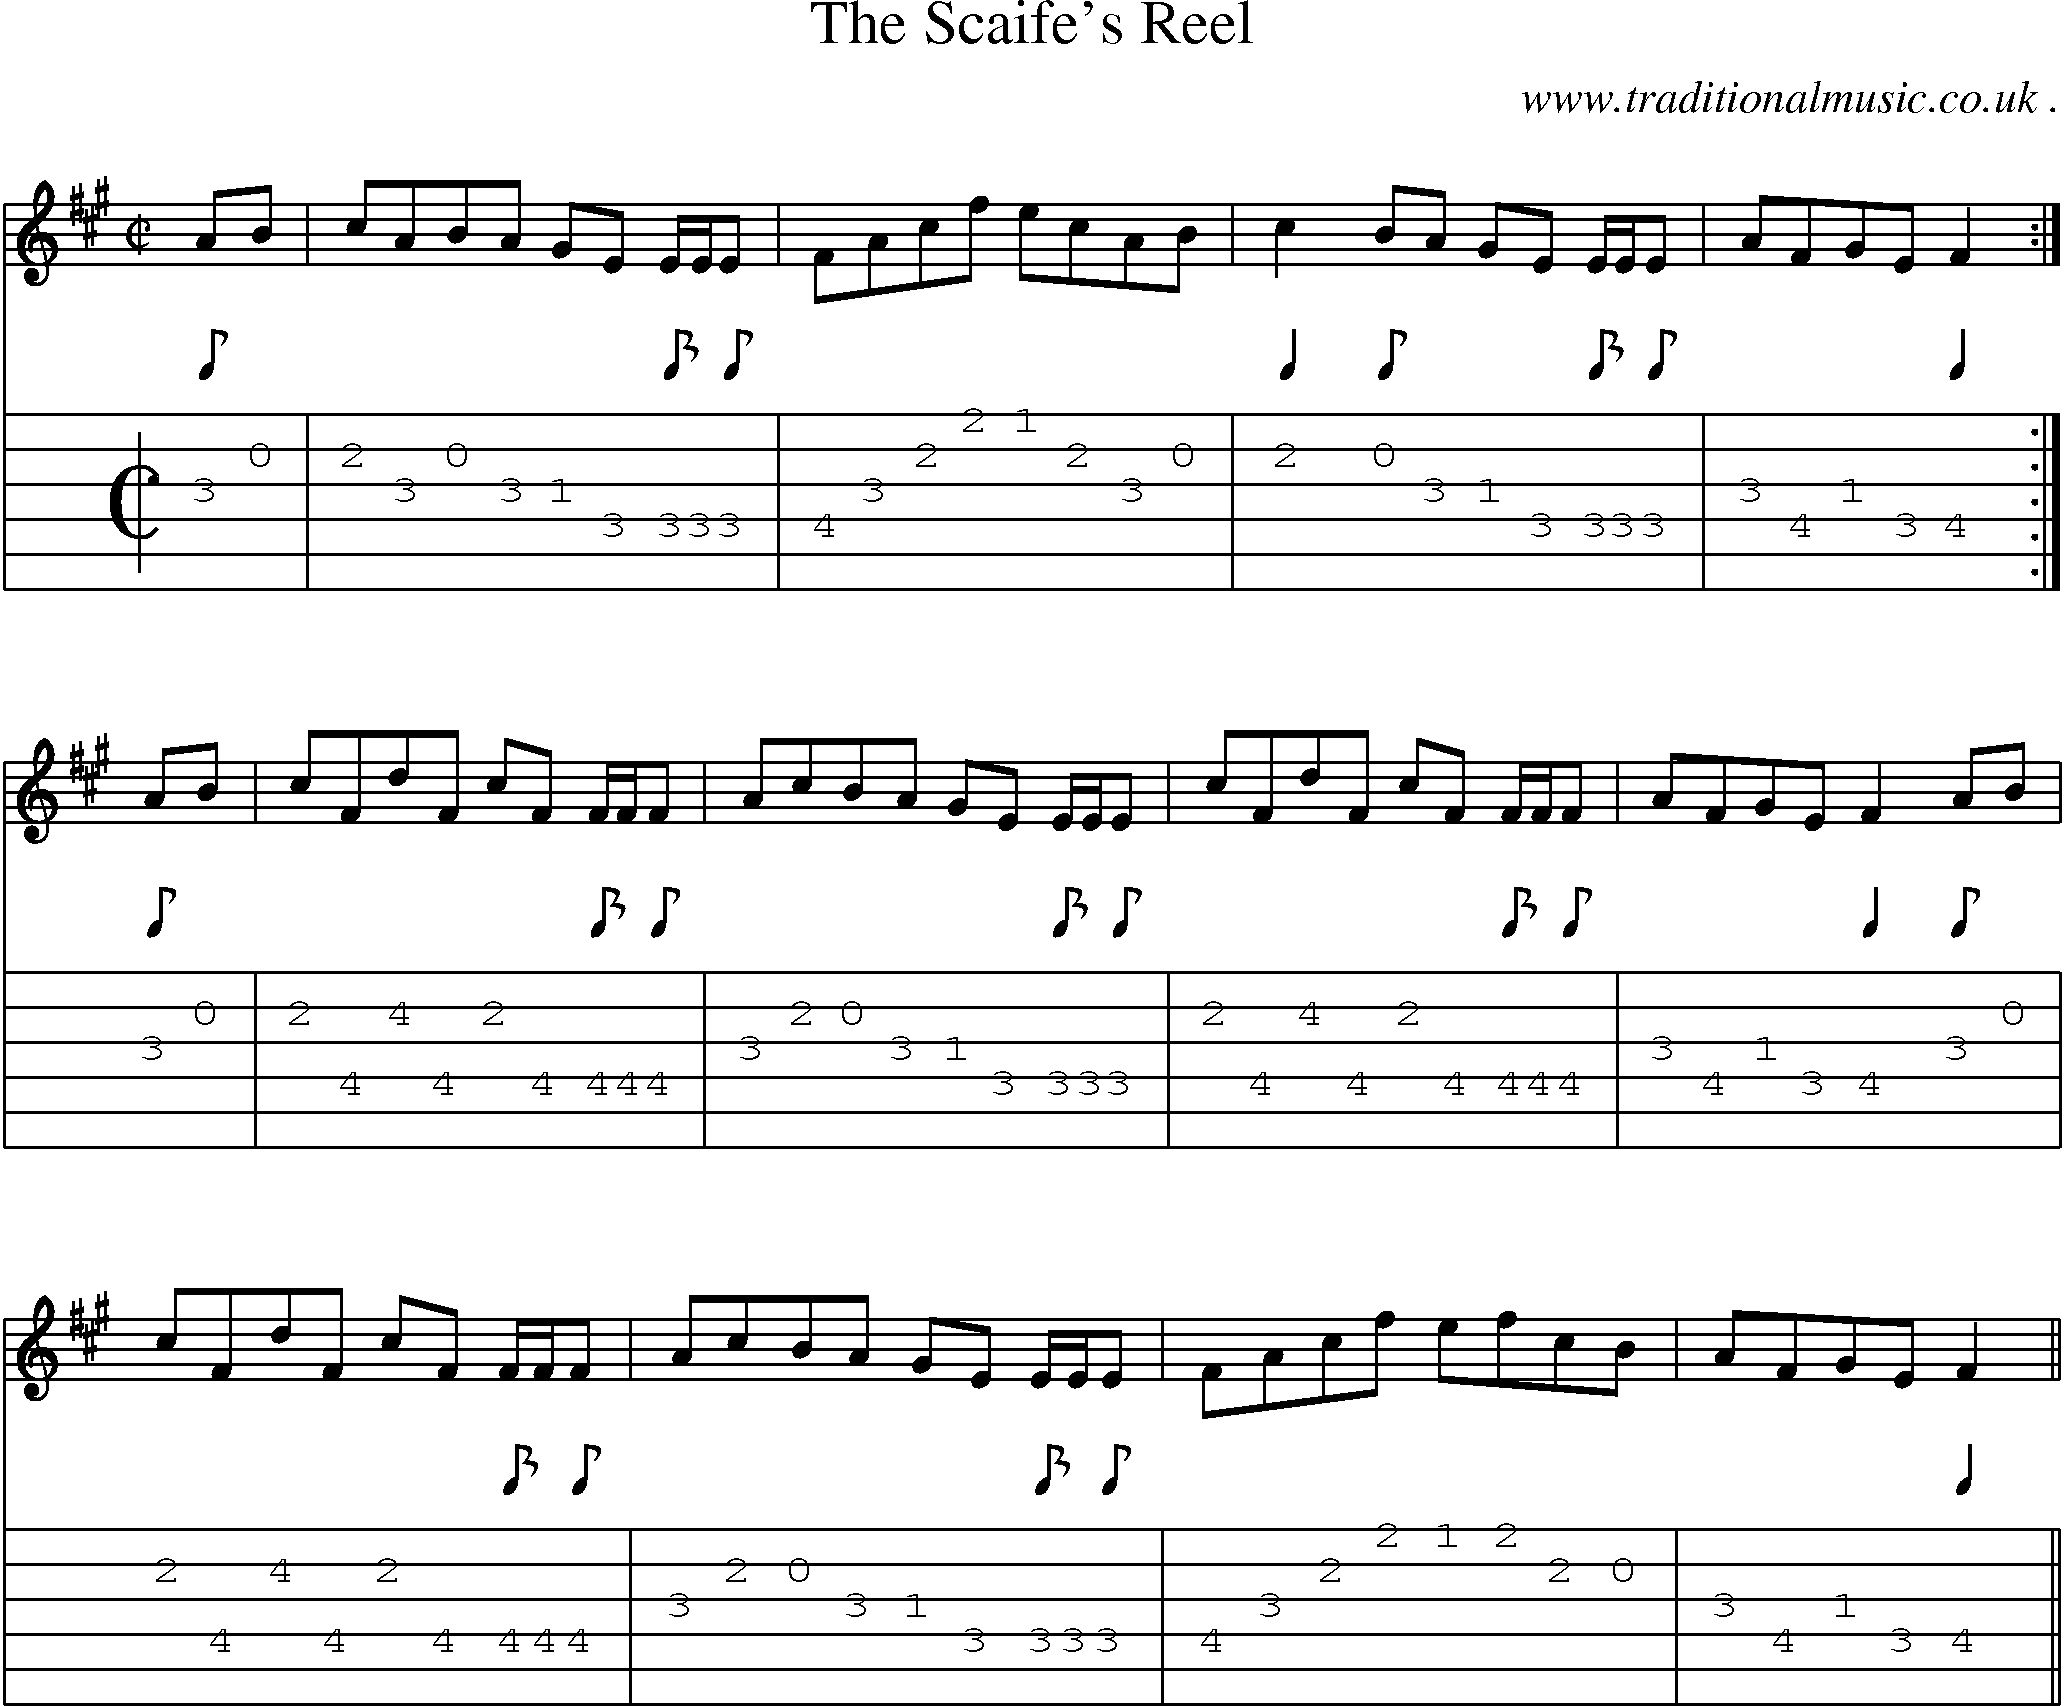 Sheet-Music and Guitar Tabs for The Scaifes Reel